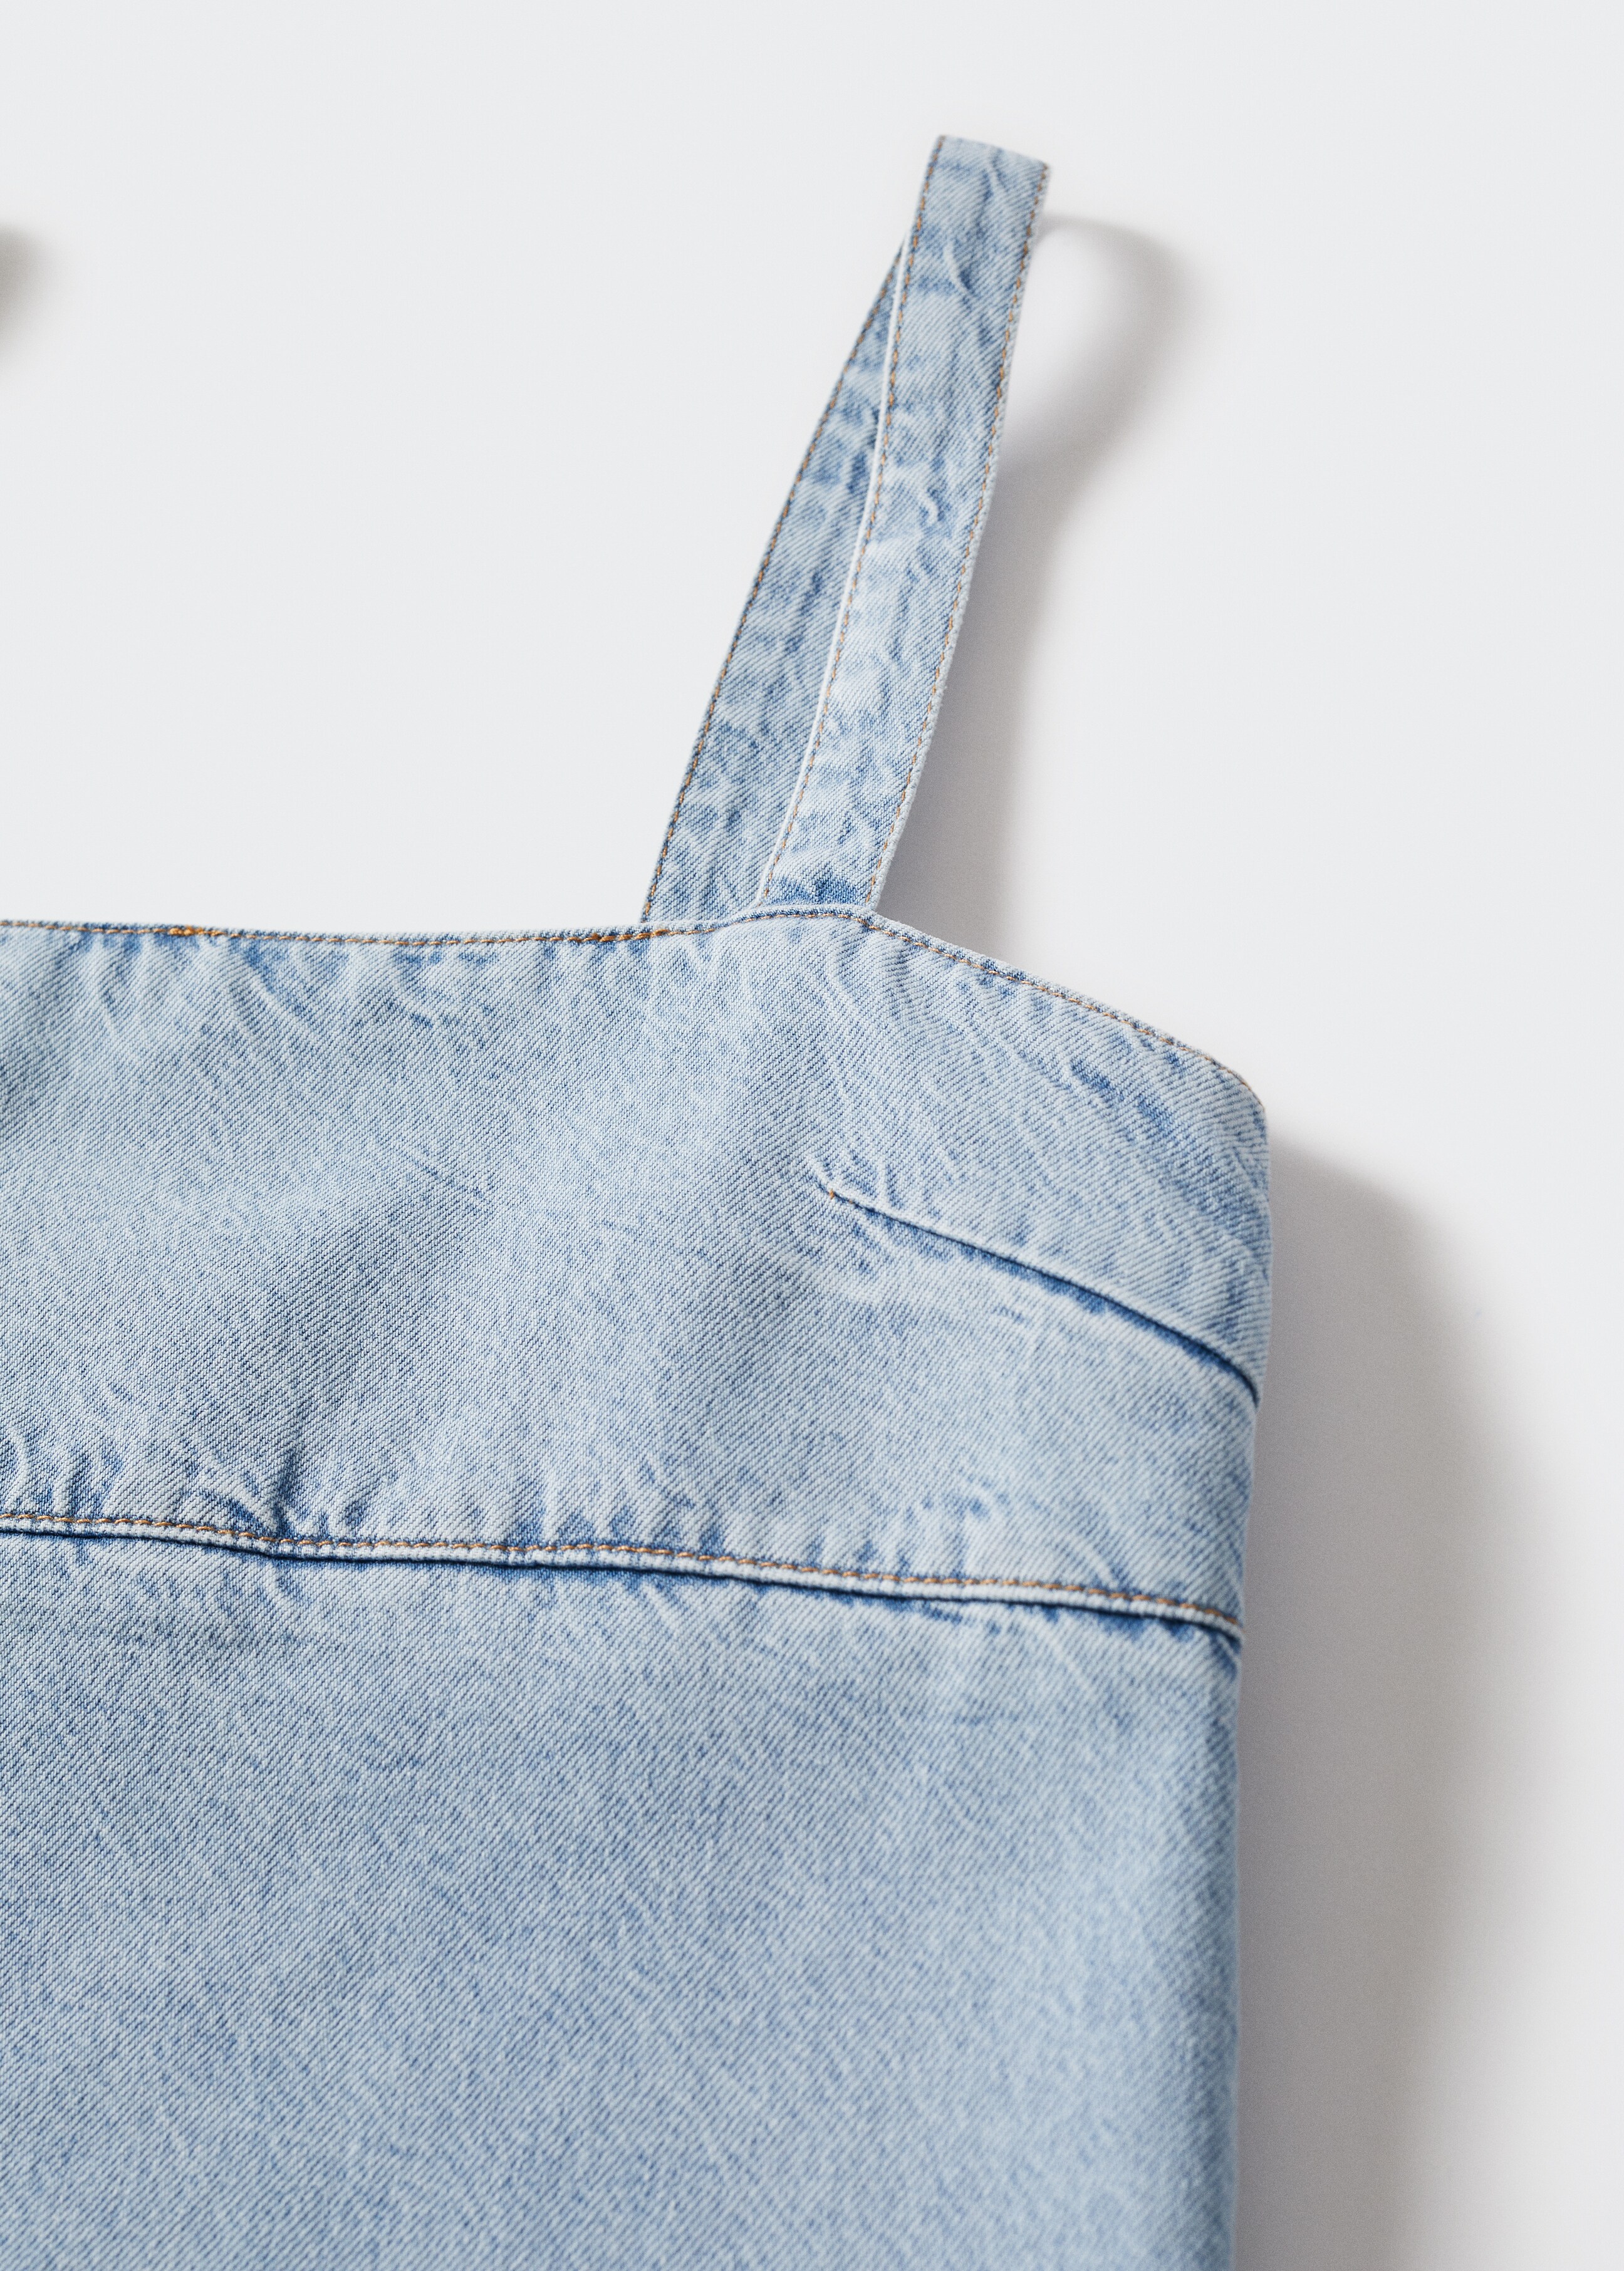 Lyocell denim dress - Details of the article 8